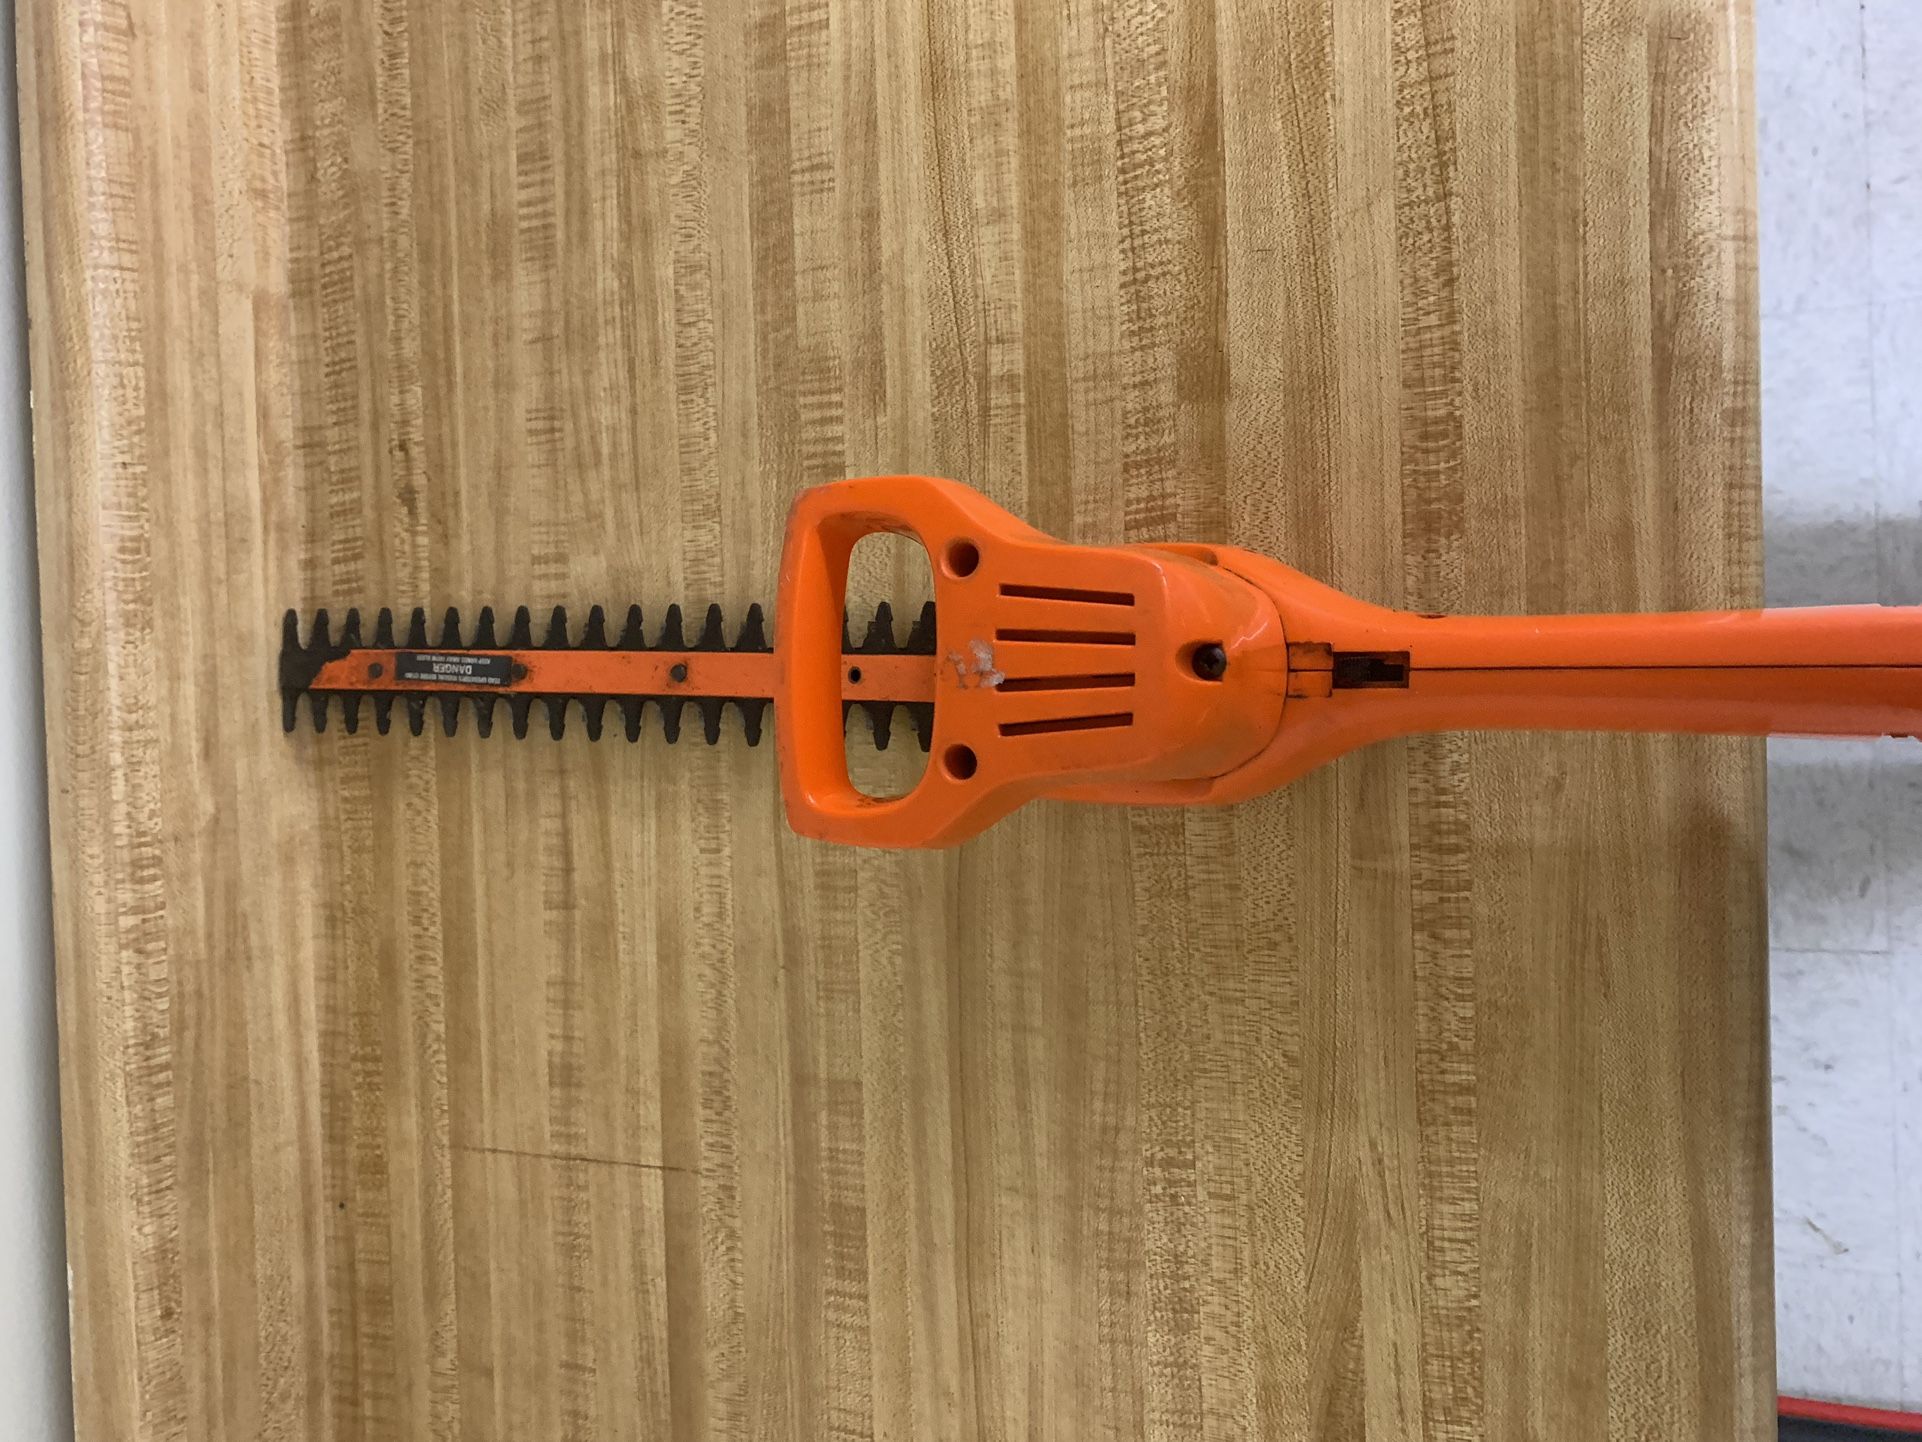 Black & Decker Electric Hedge Trimmer for Sale in Maple Valley, WA - OfferUp